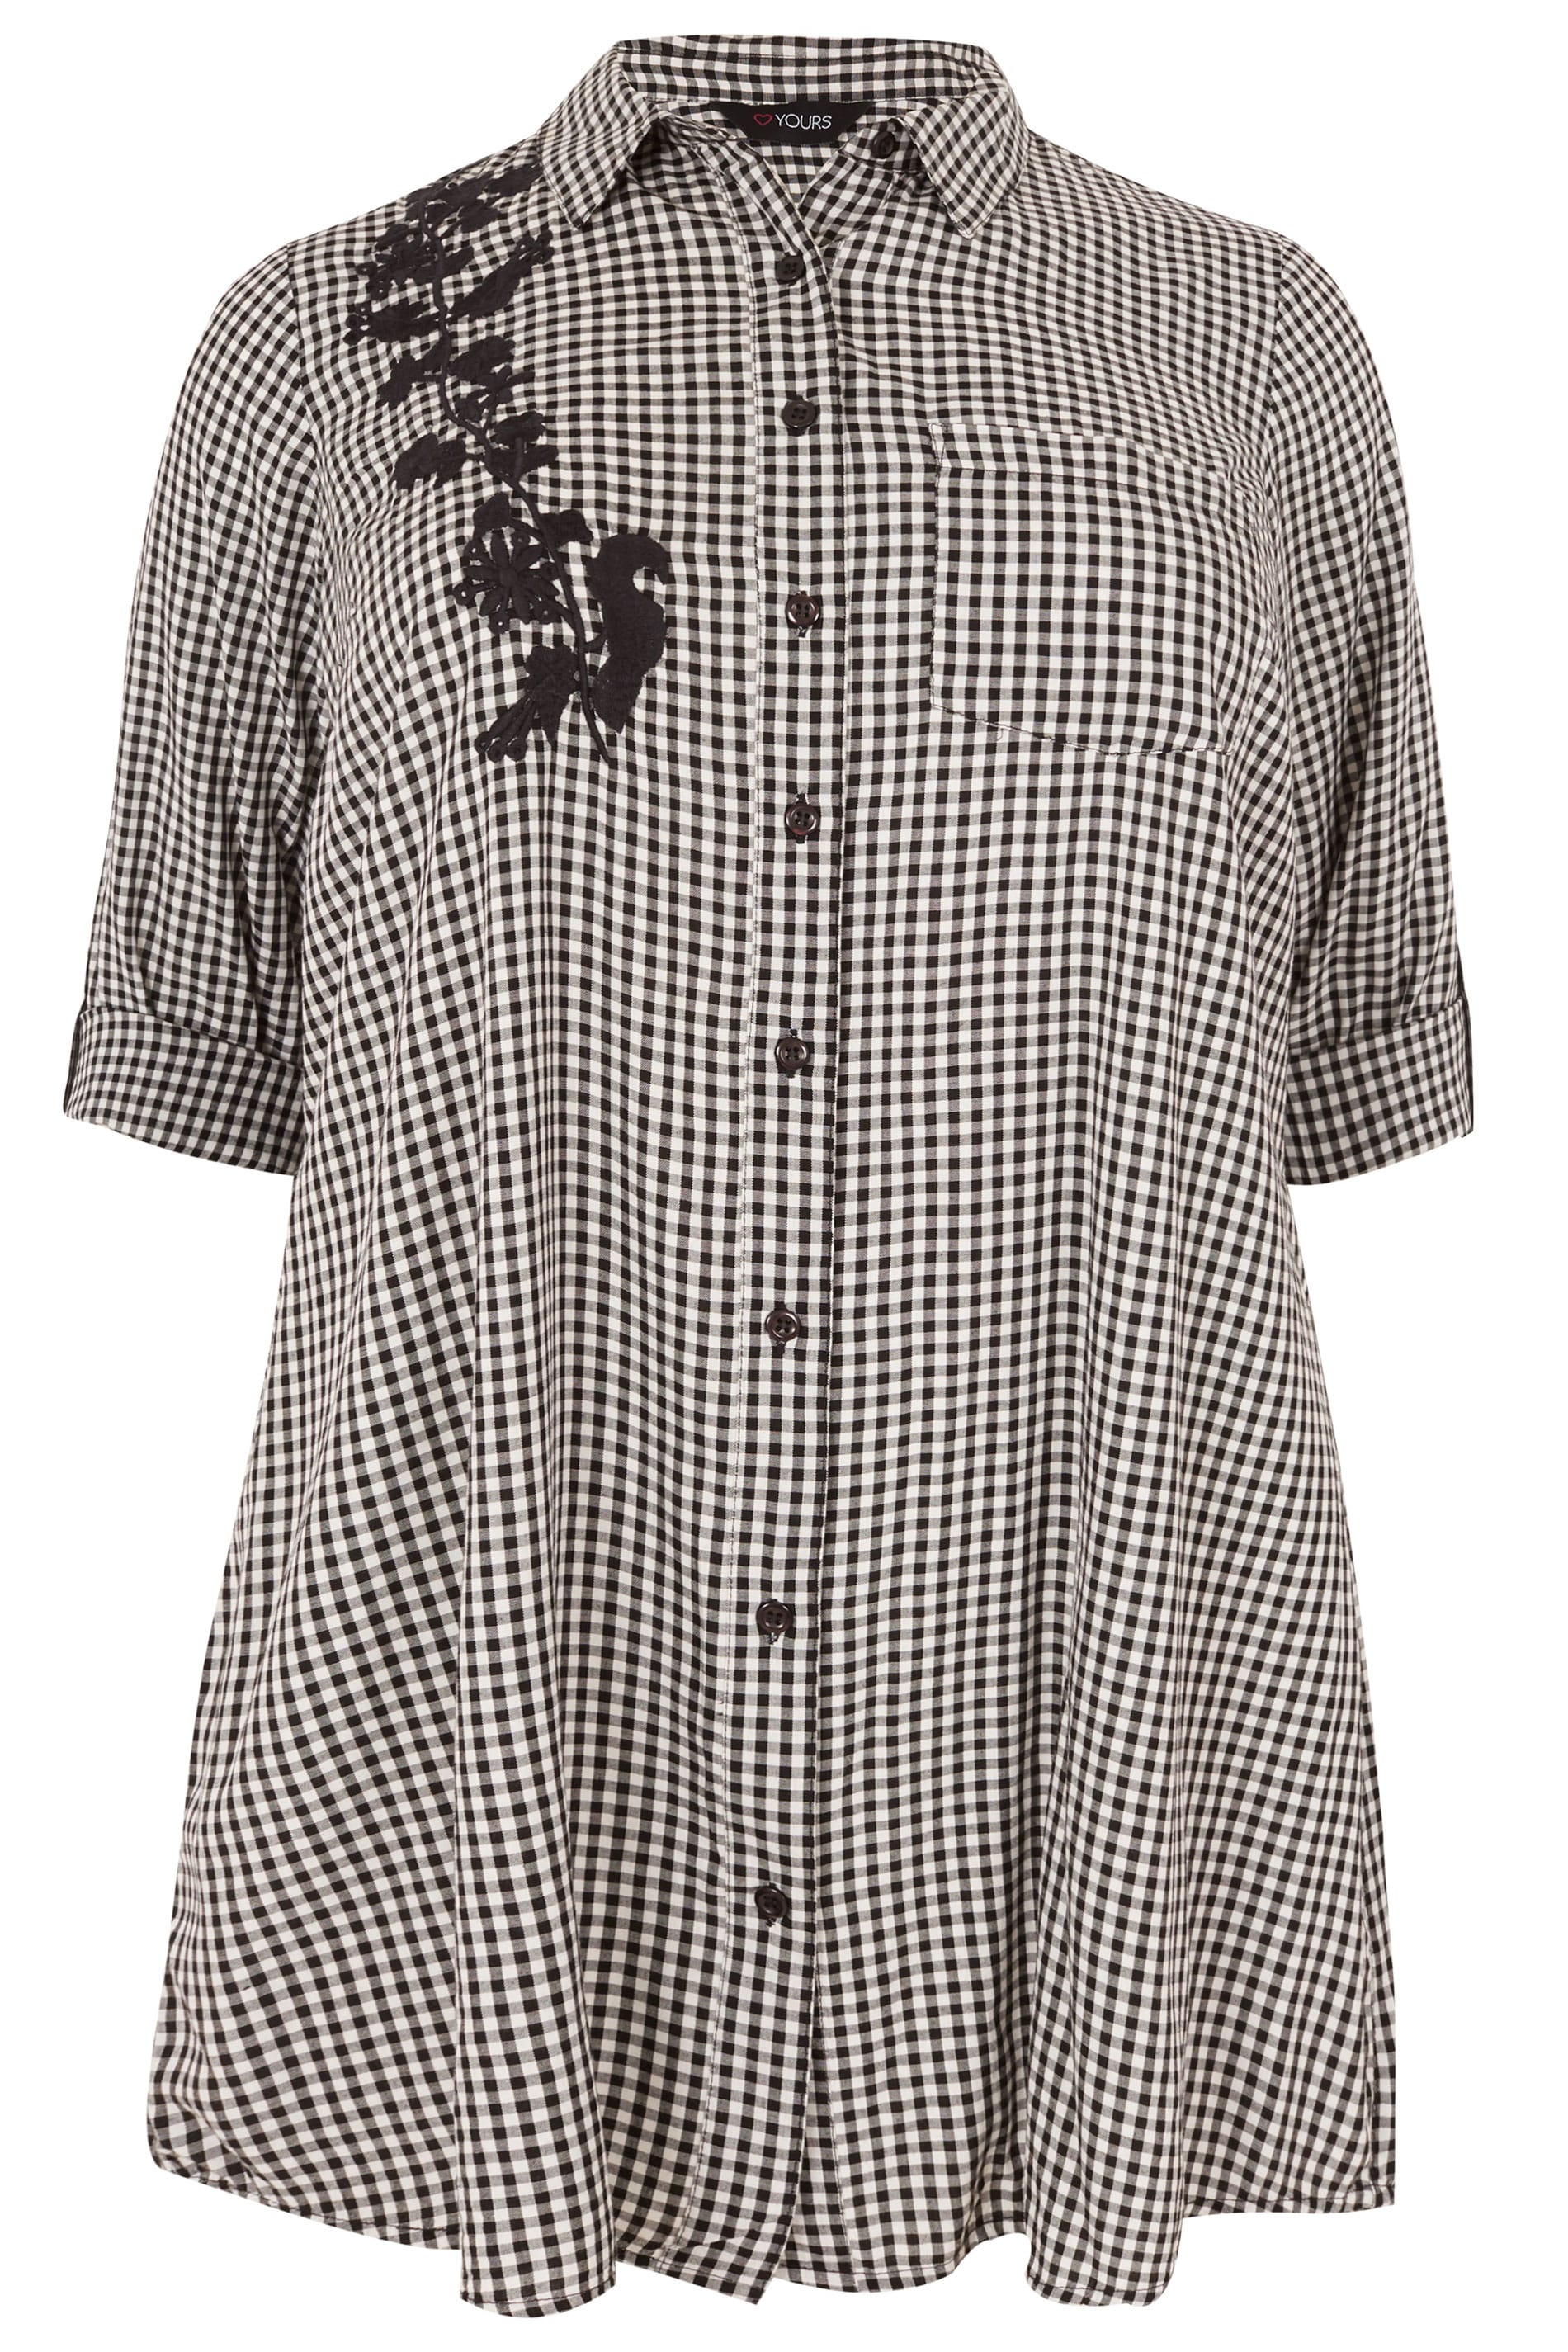 Black & White Gingham Boyfriend Shirt With Floral Embroidery, plus size ...